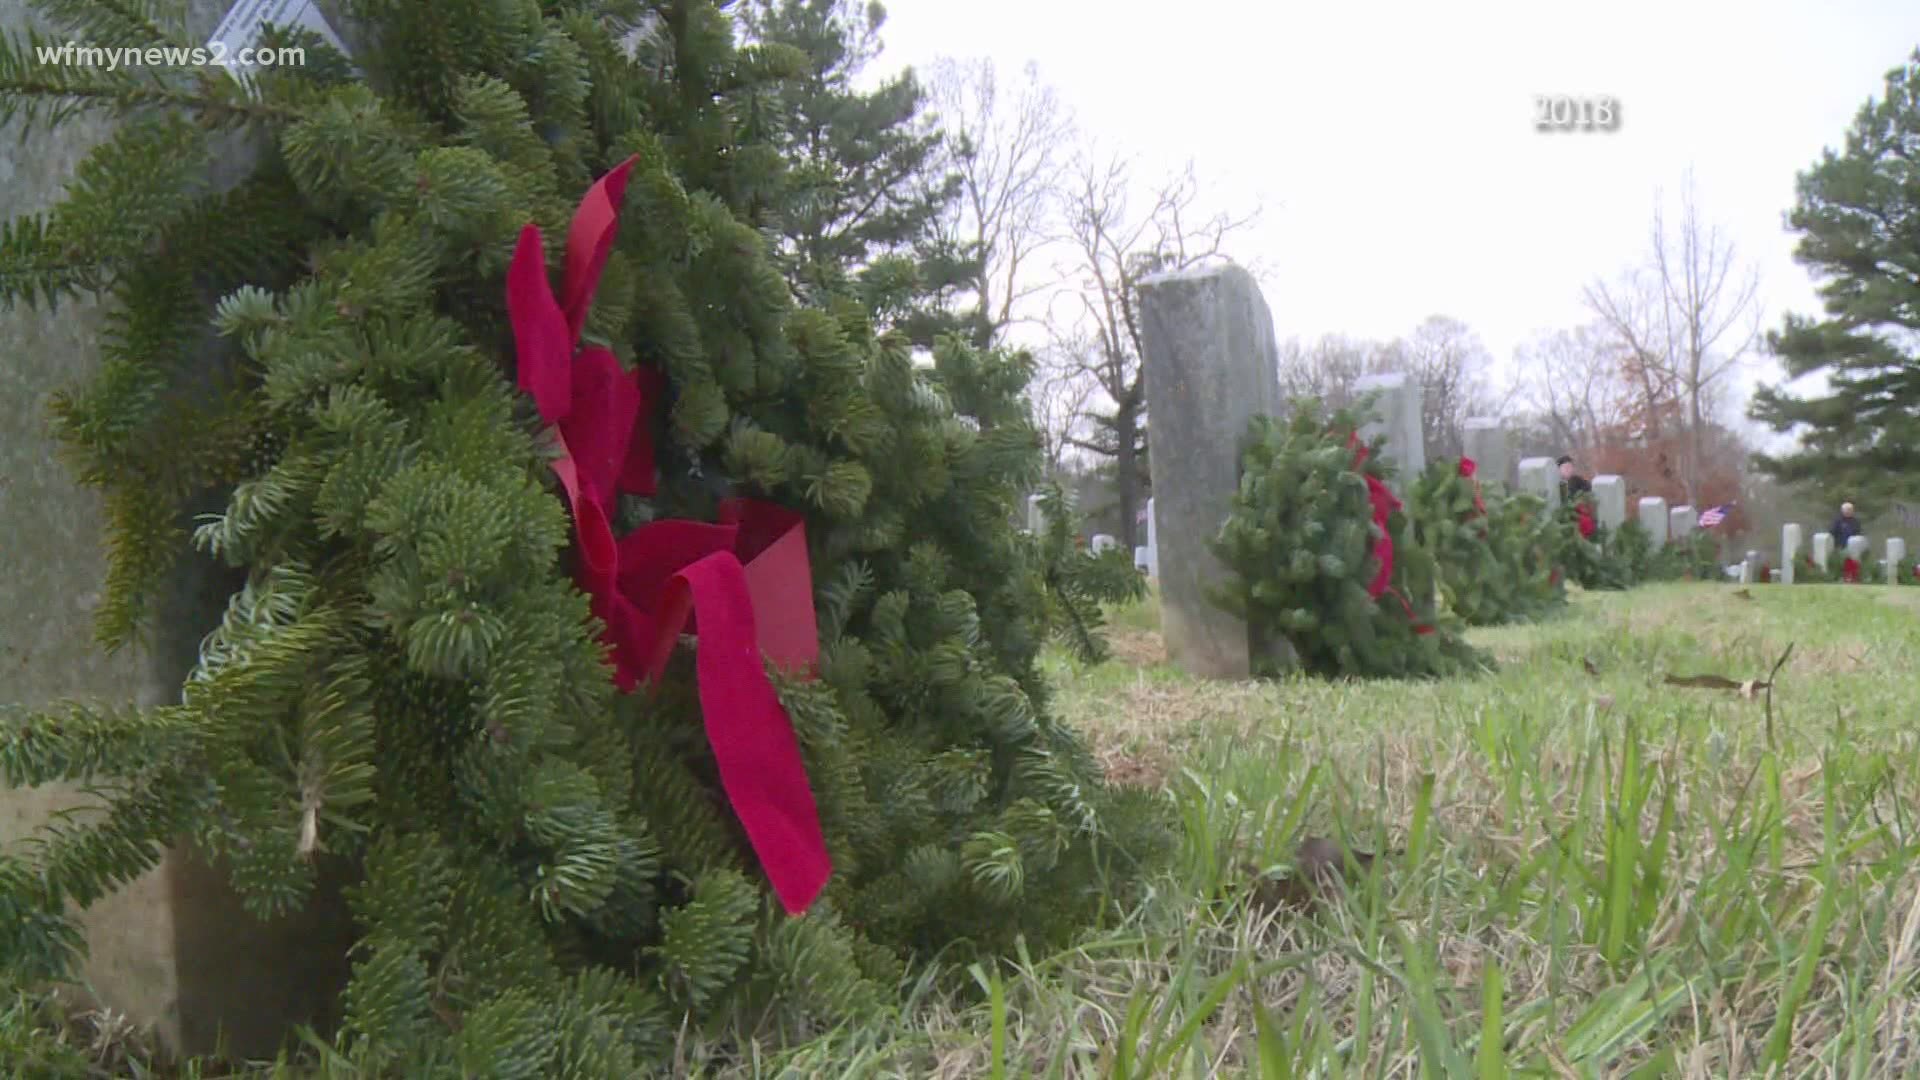 Wreaths Across Greensboro’s public ceremony is canceled due to COVID restrictions, but the organization plans to lay more than 1,100 wreaths at a local cemetery.